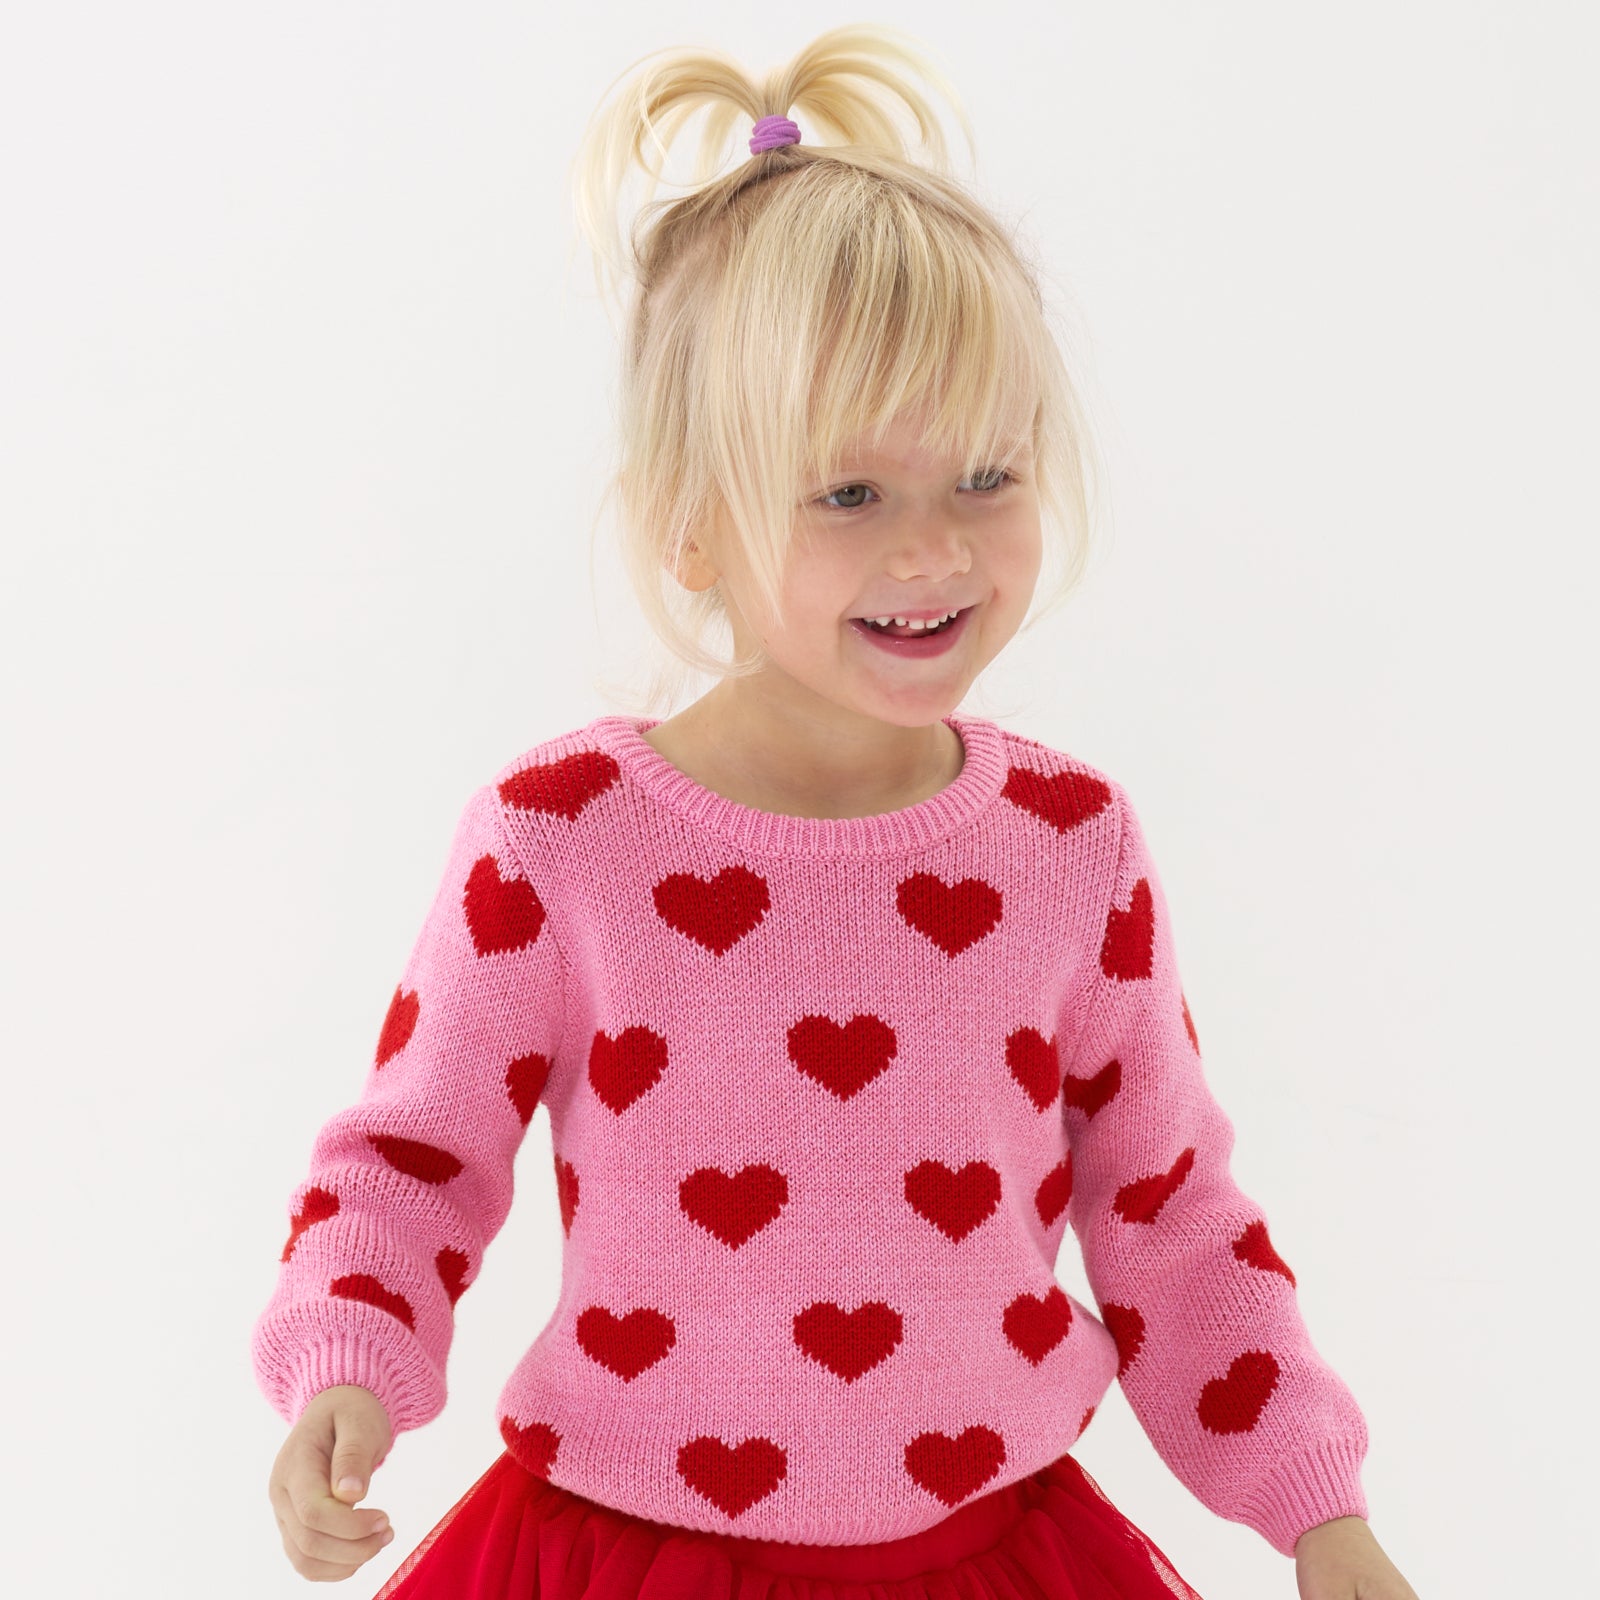 Close up image of a child wearing a Hearts knit sweater